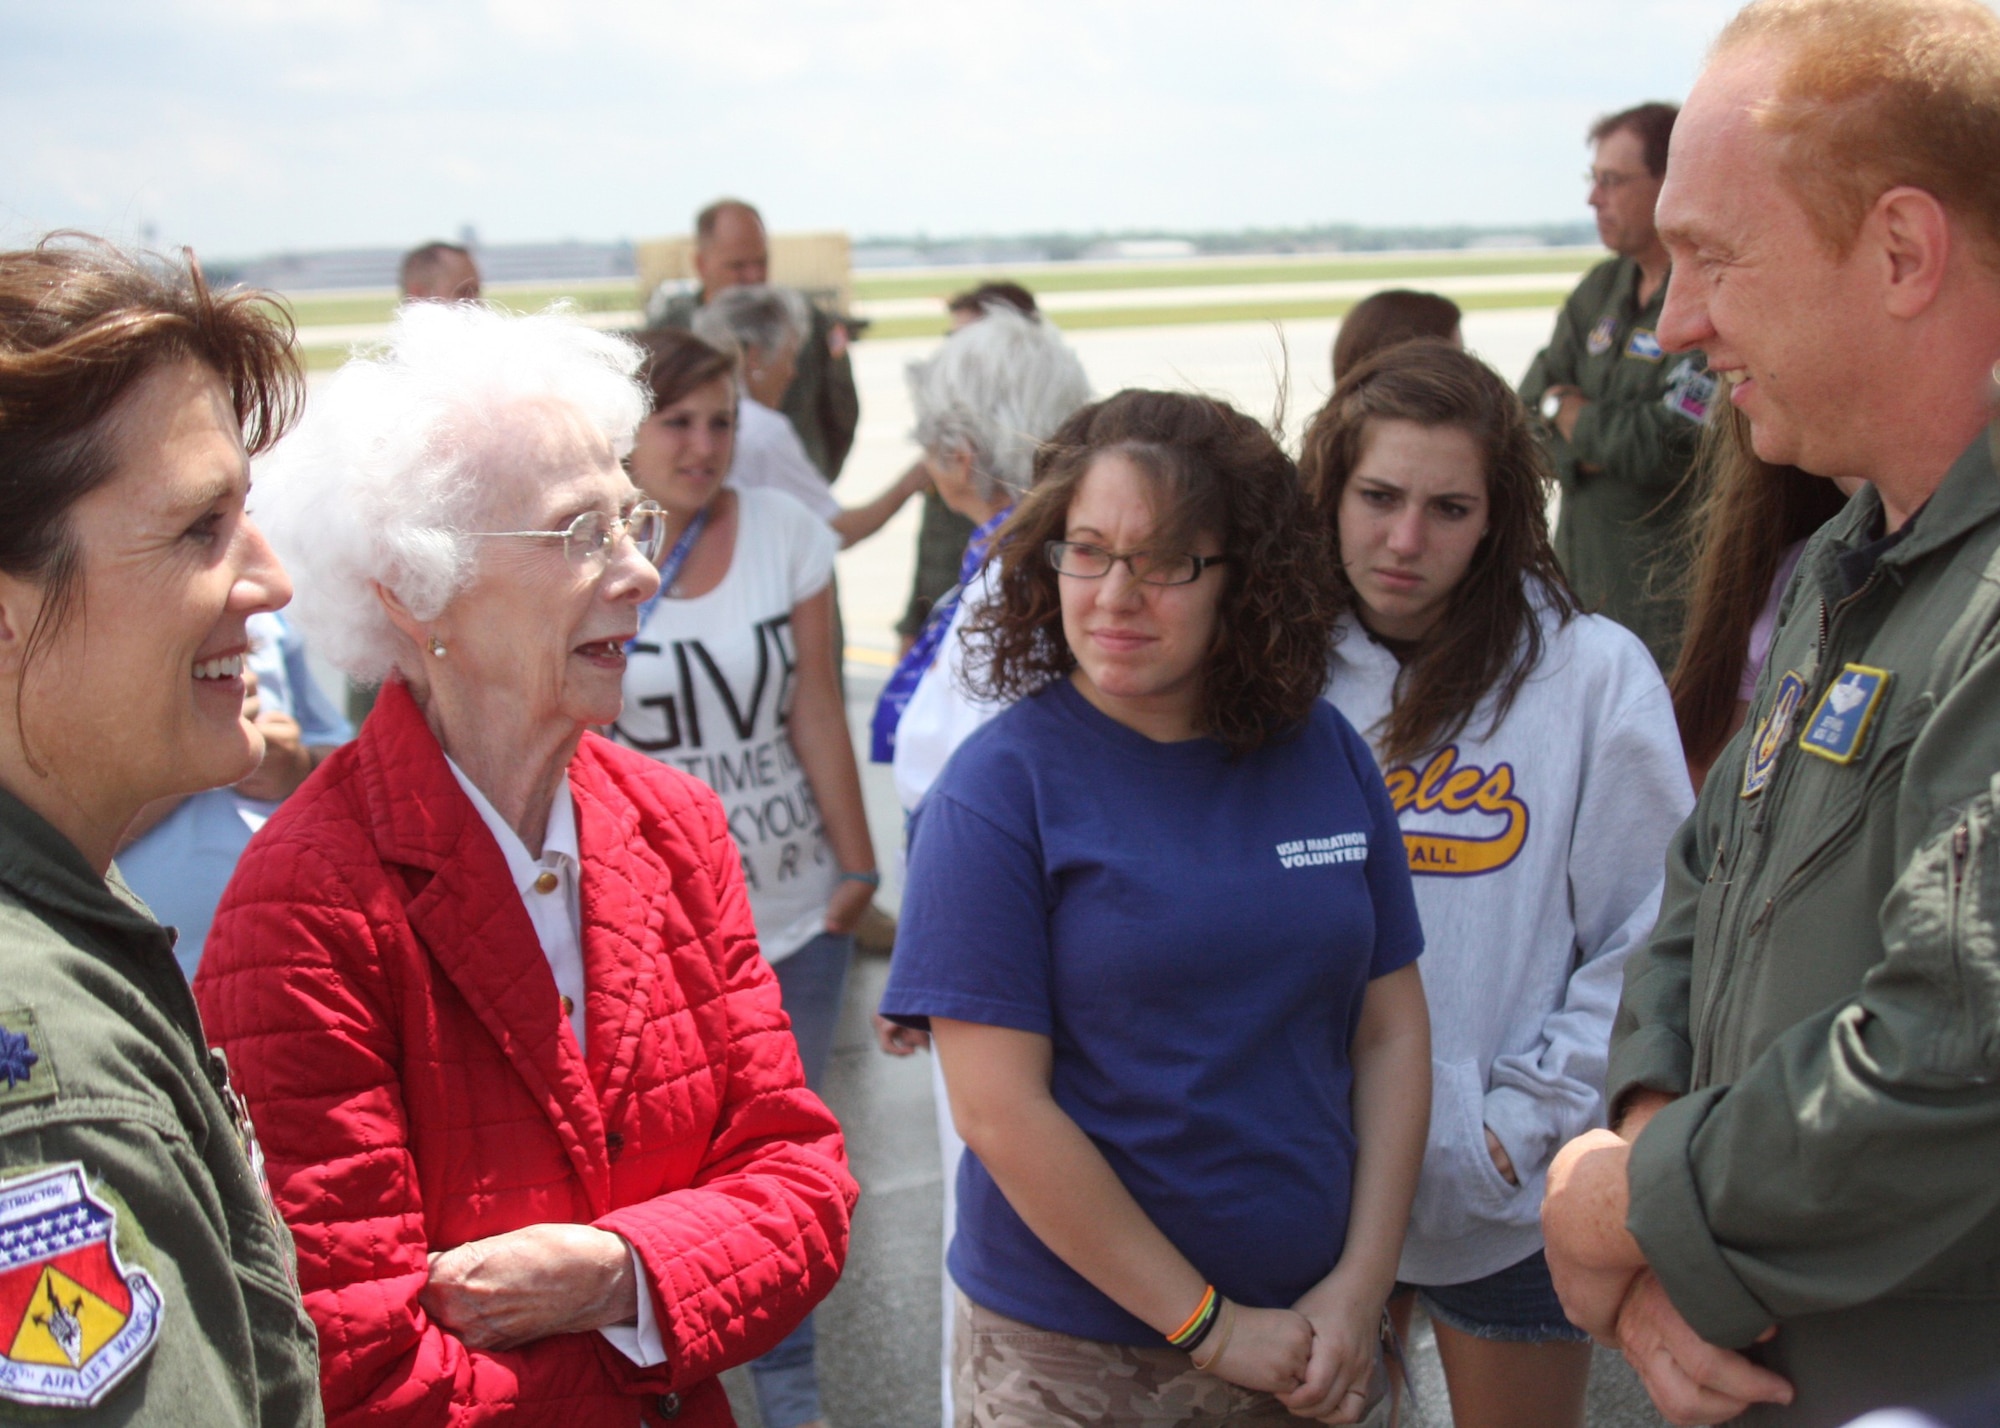 WRIGHT-PATTERSON AIR FORCE BASE, Ohio - Francis Brookings, World War II Women Airforce Service Pilots (WASP), shares stories about being a WASP with reservists from the 445th Airlift Wing and to 46 young girls attending the Third Annual Wings of Women Conference July 17.  Part of the conference included a stop at the 445 AW where Ms. Brookings and three other WASPs had the opportunity to listen to a wing mission briefing, learn about the mission of the 445th Aeromedical Evacuation Squadron and tour a C-5 Galaxy aircraft. (Air Force photo/Senior Airman Mikhail Berlin)